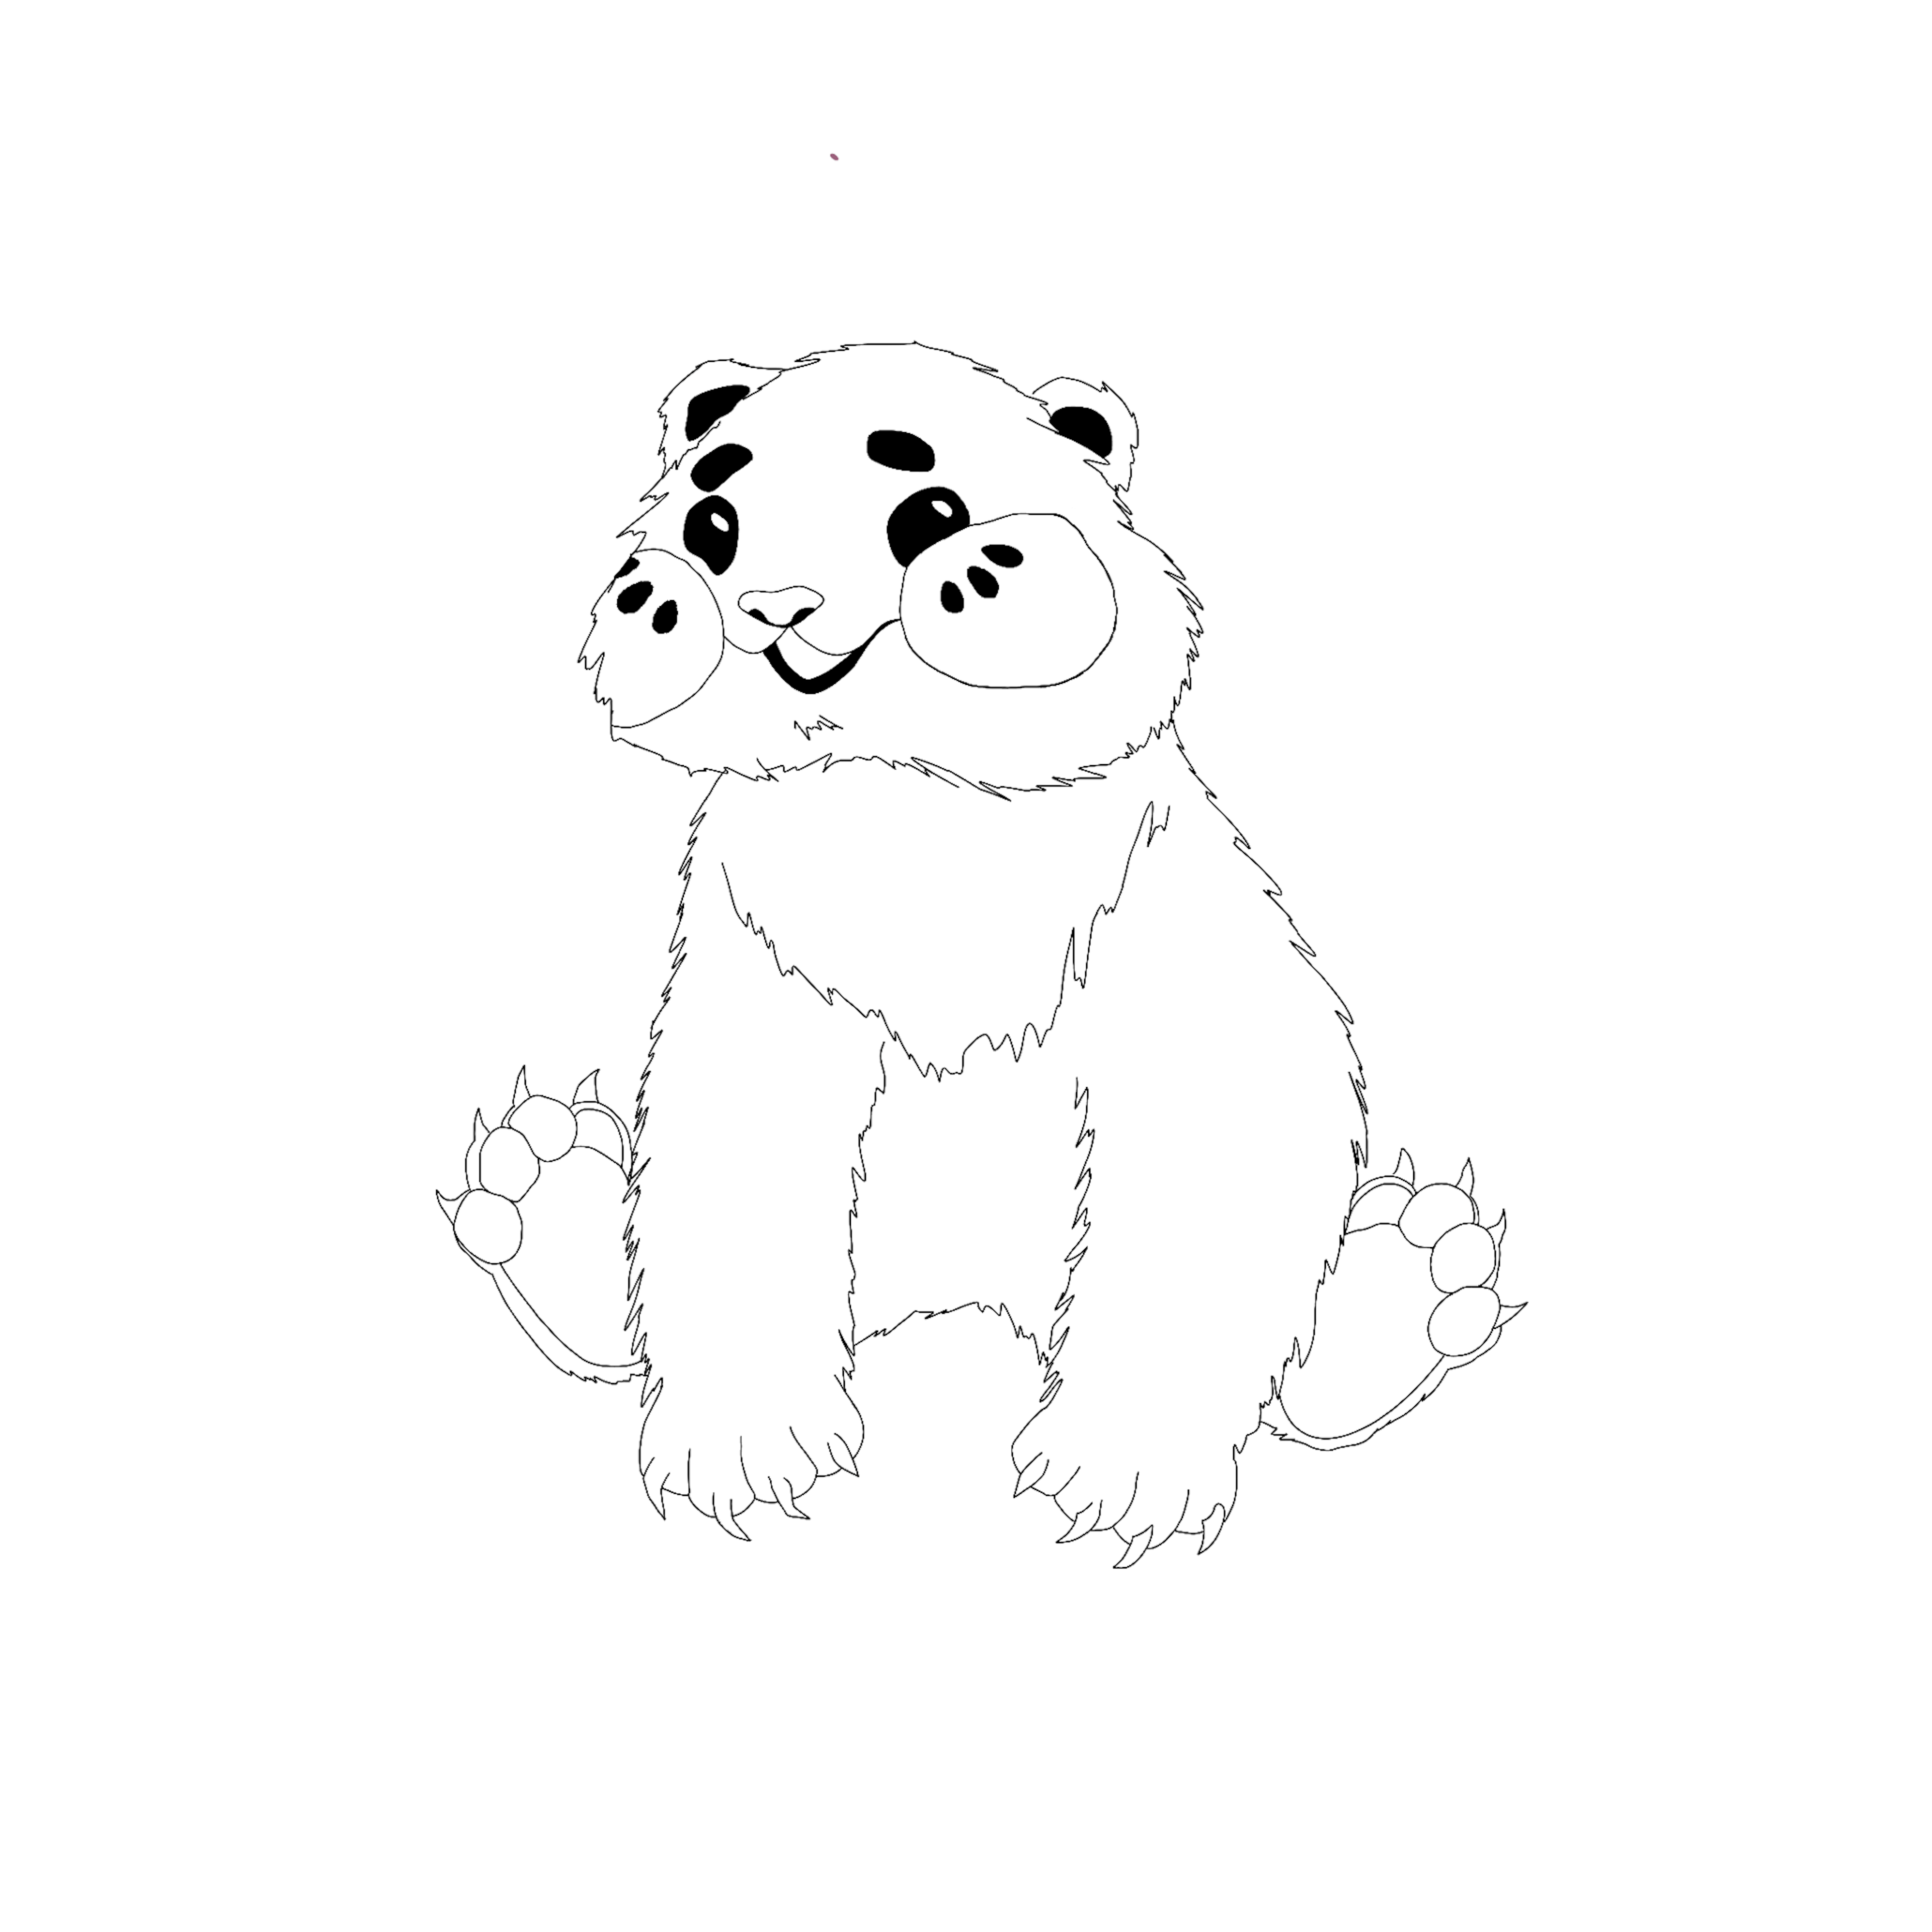 Combining the stature of a polar bear with the charm of a quokka, this line art shows a unique fusion. A furry body with the robustness of a polar bear yet facial shape of a quokka. Delicate, mischievous eyes add an unsettling charm and shared features unite the species together.